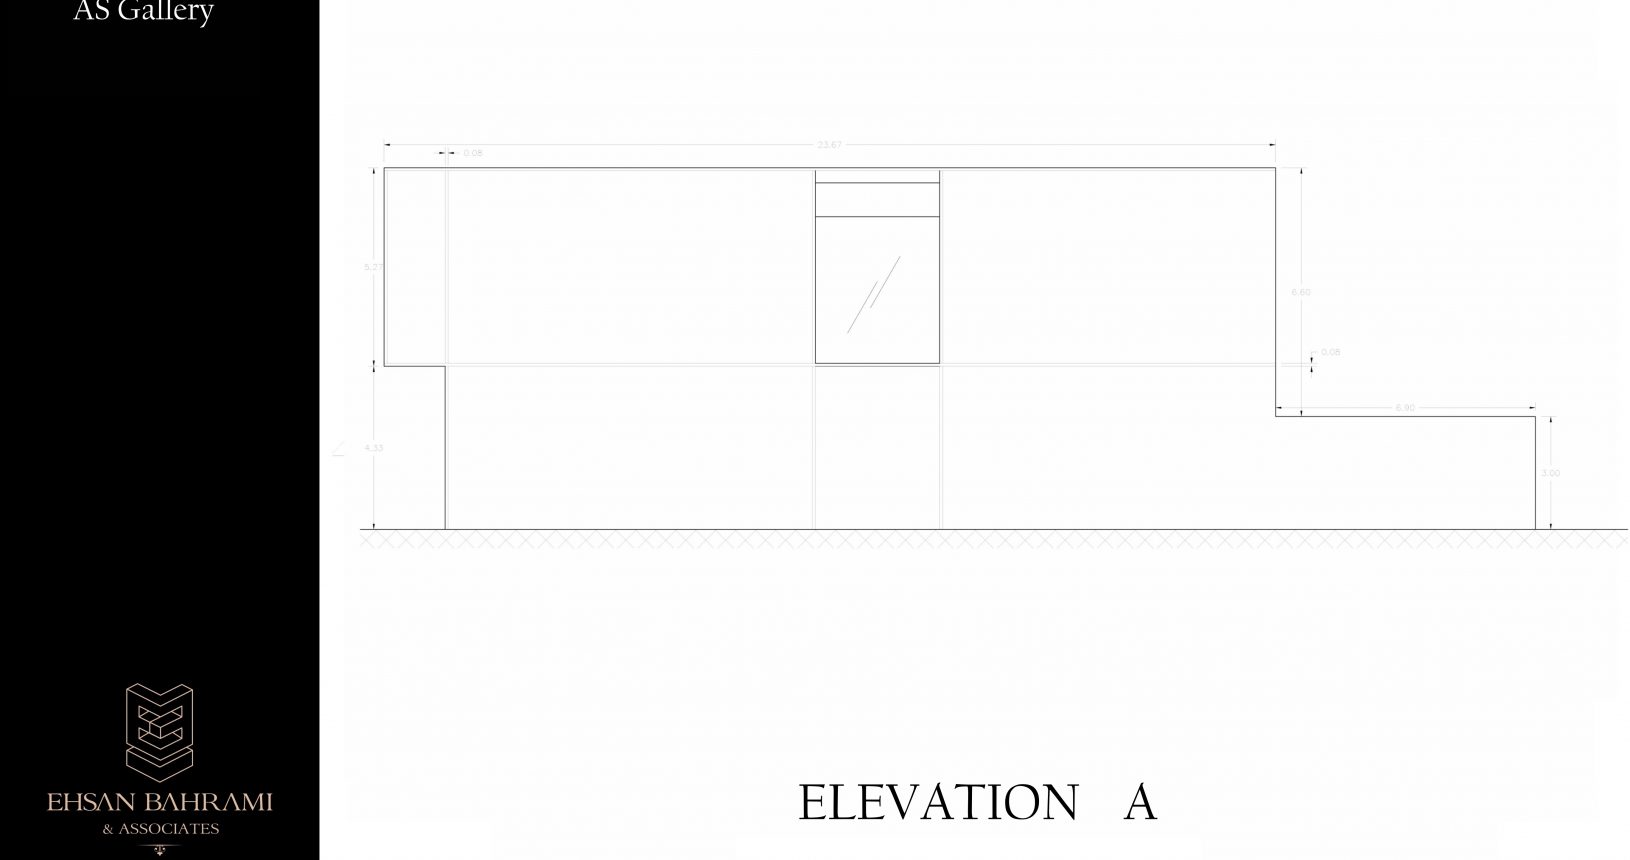 As Auto Gallery ELEVATION A